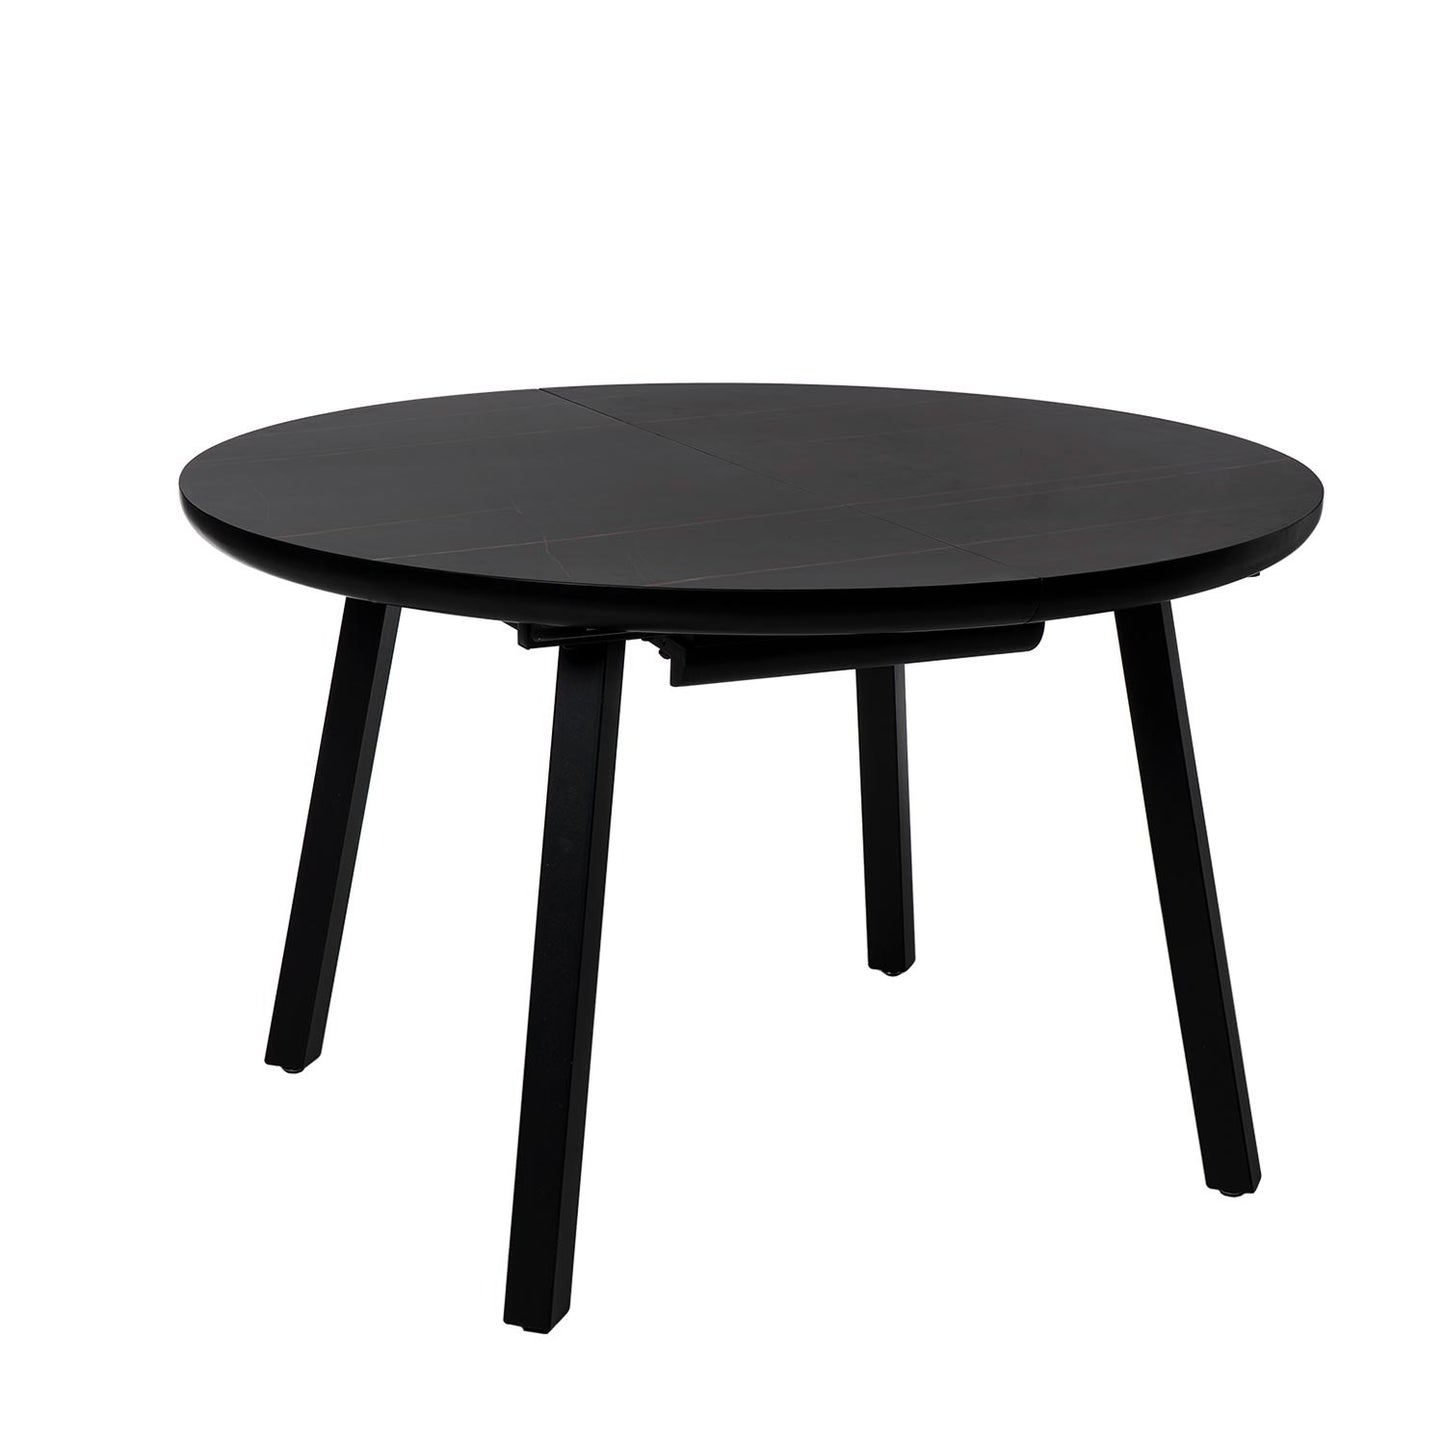 Hetty extendable dining table